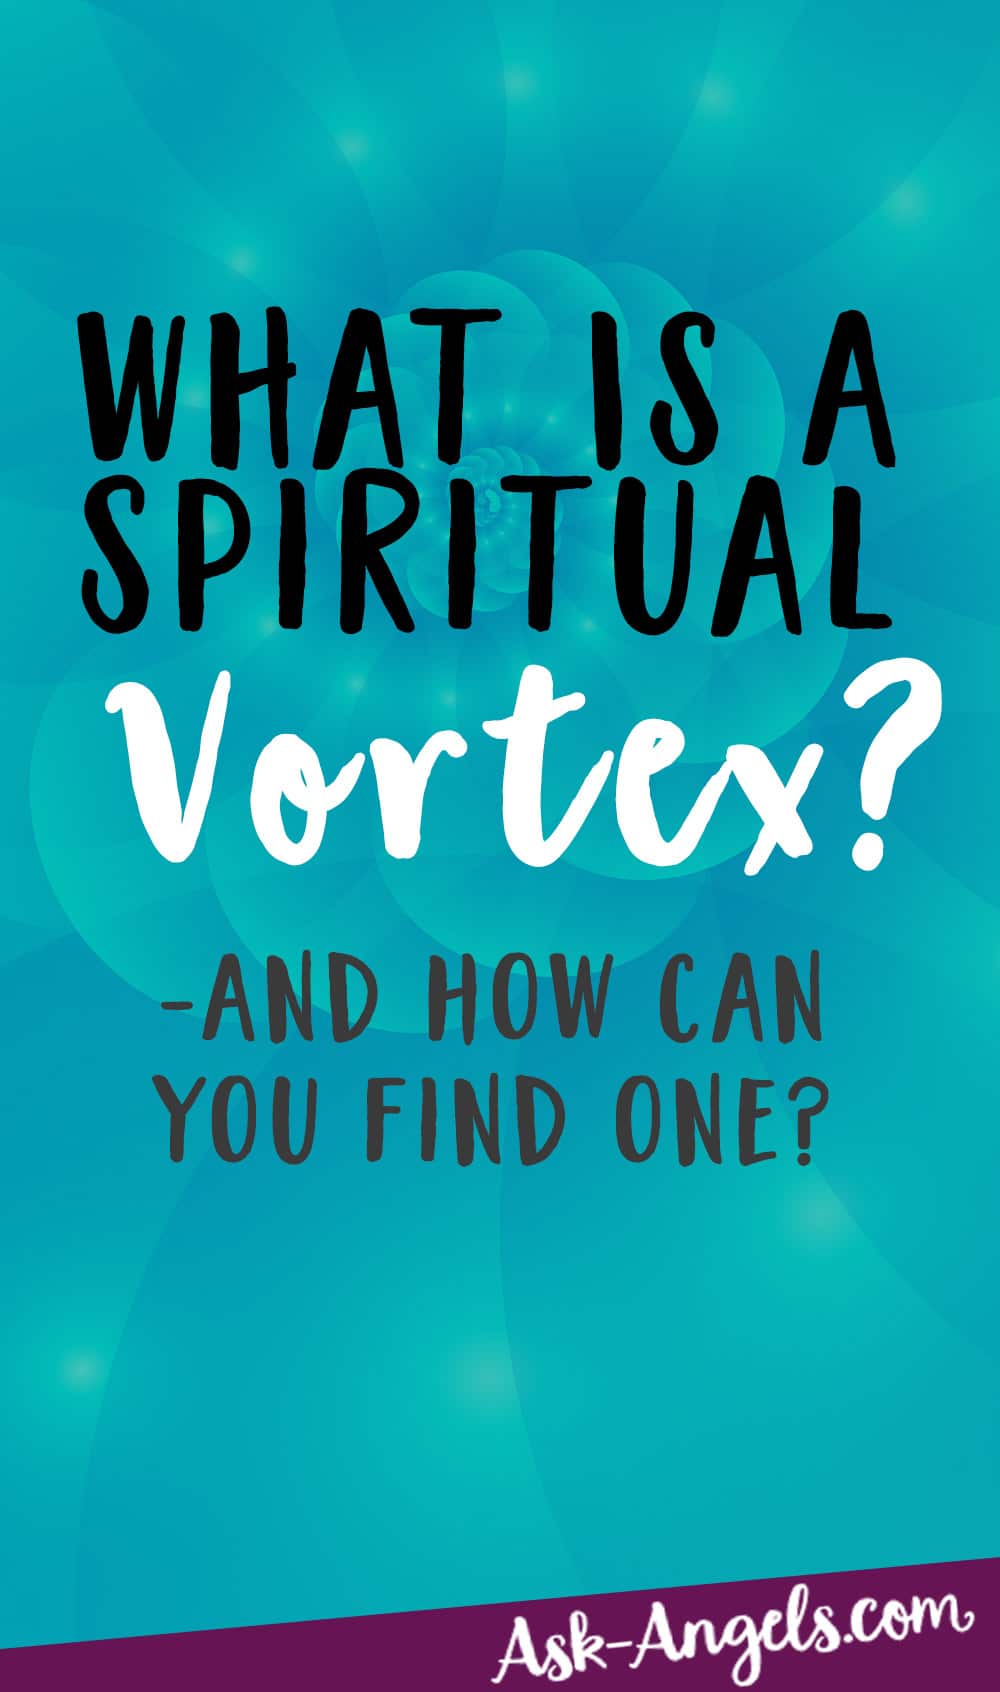 What Is A Vortex? -And How Can You Find One?